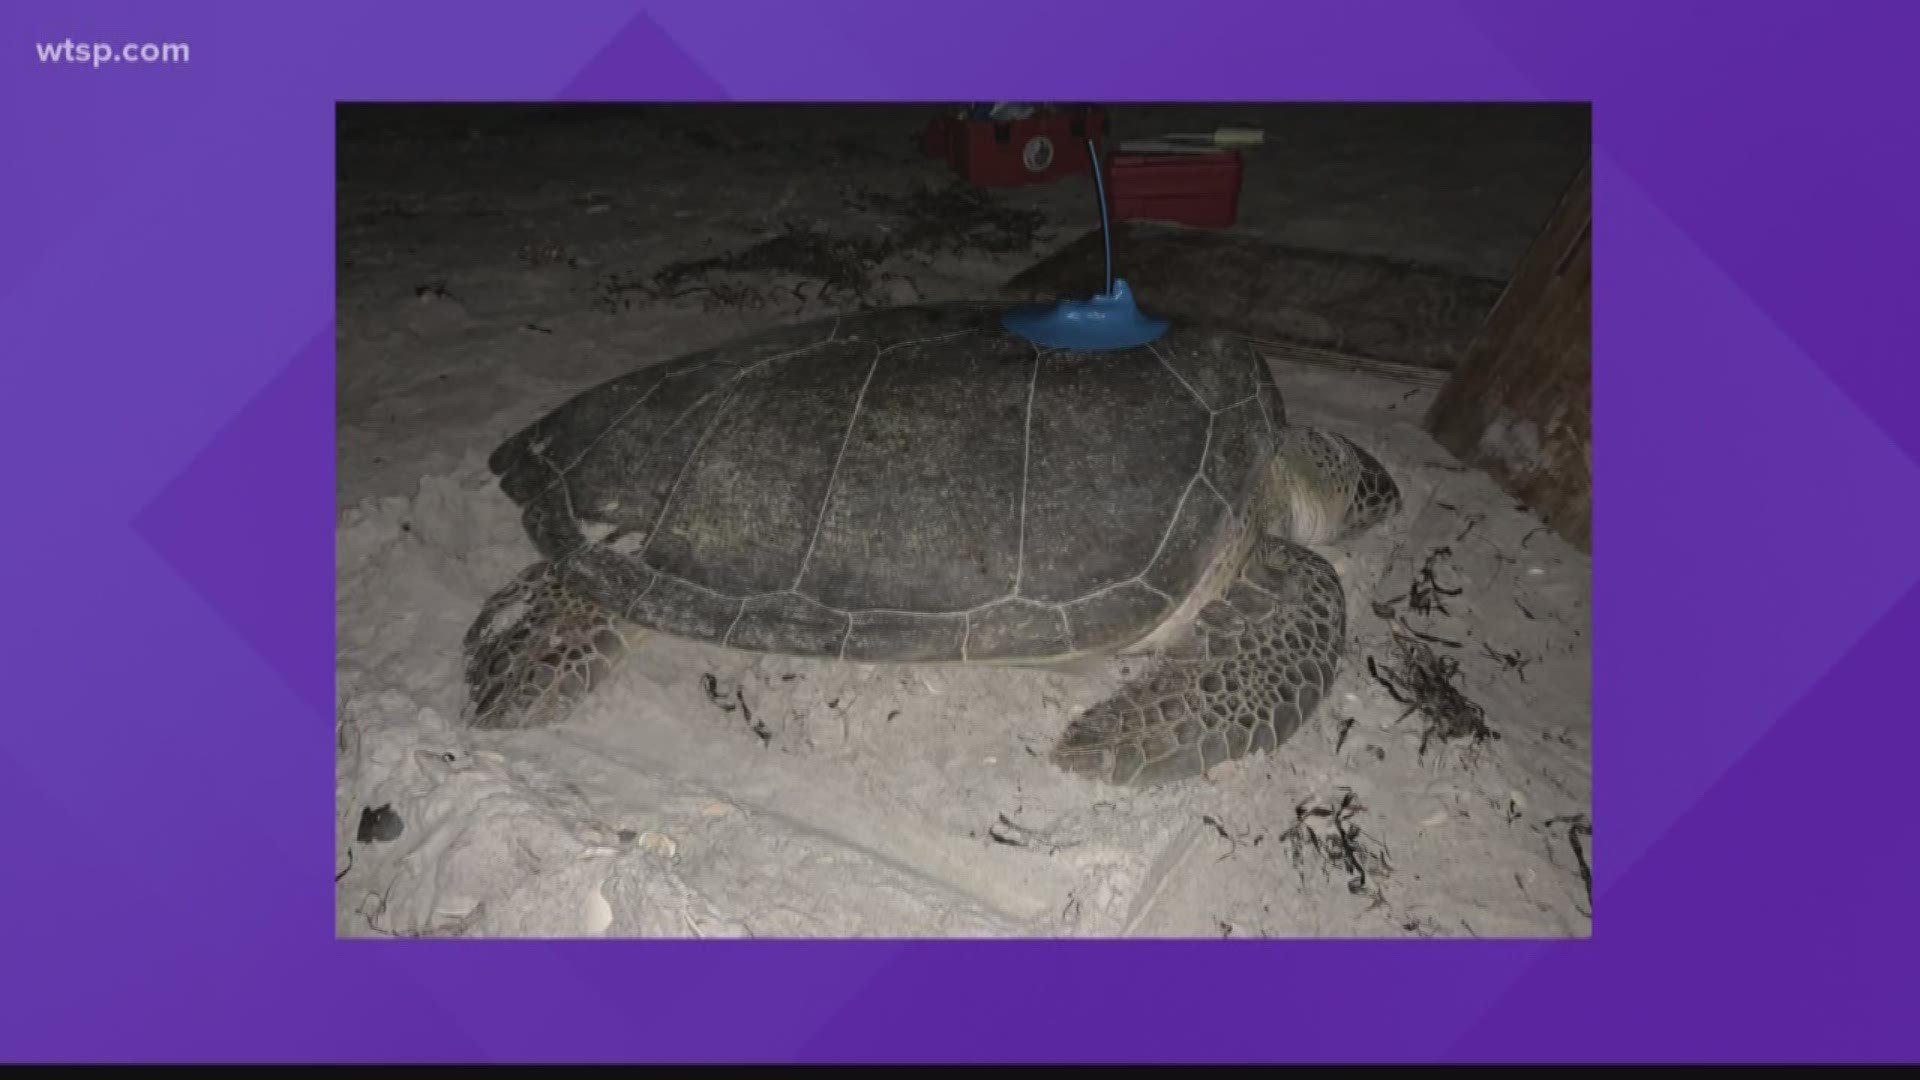 MOTE has started tracking the migration of these sea turtles.
Researchers attach a small device to the shell of the turtle that allows them to track by satellite. 
Scientists hope to find where the turtles are coming from and what they are doing in the gulf.